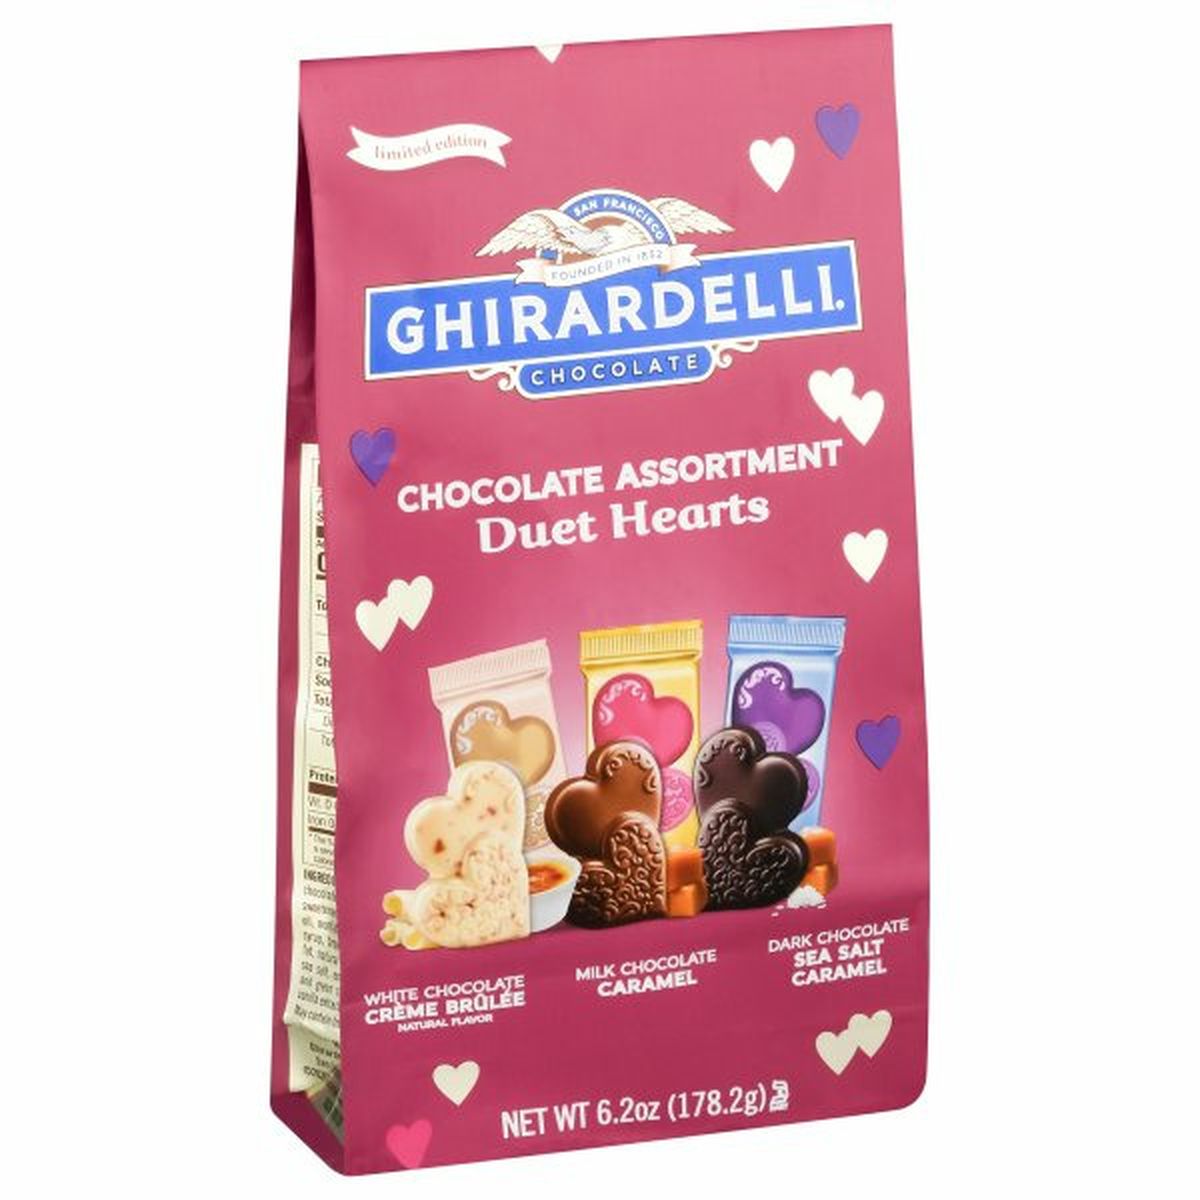 Calories in Ghirardelli Chocolate, Assortment, Duet Hearts, Limited Edition